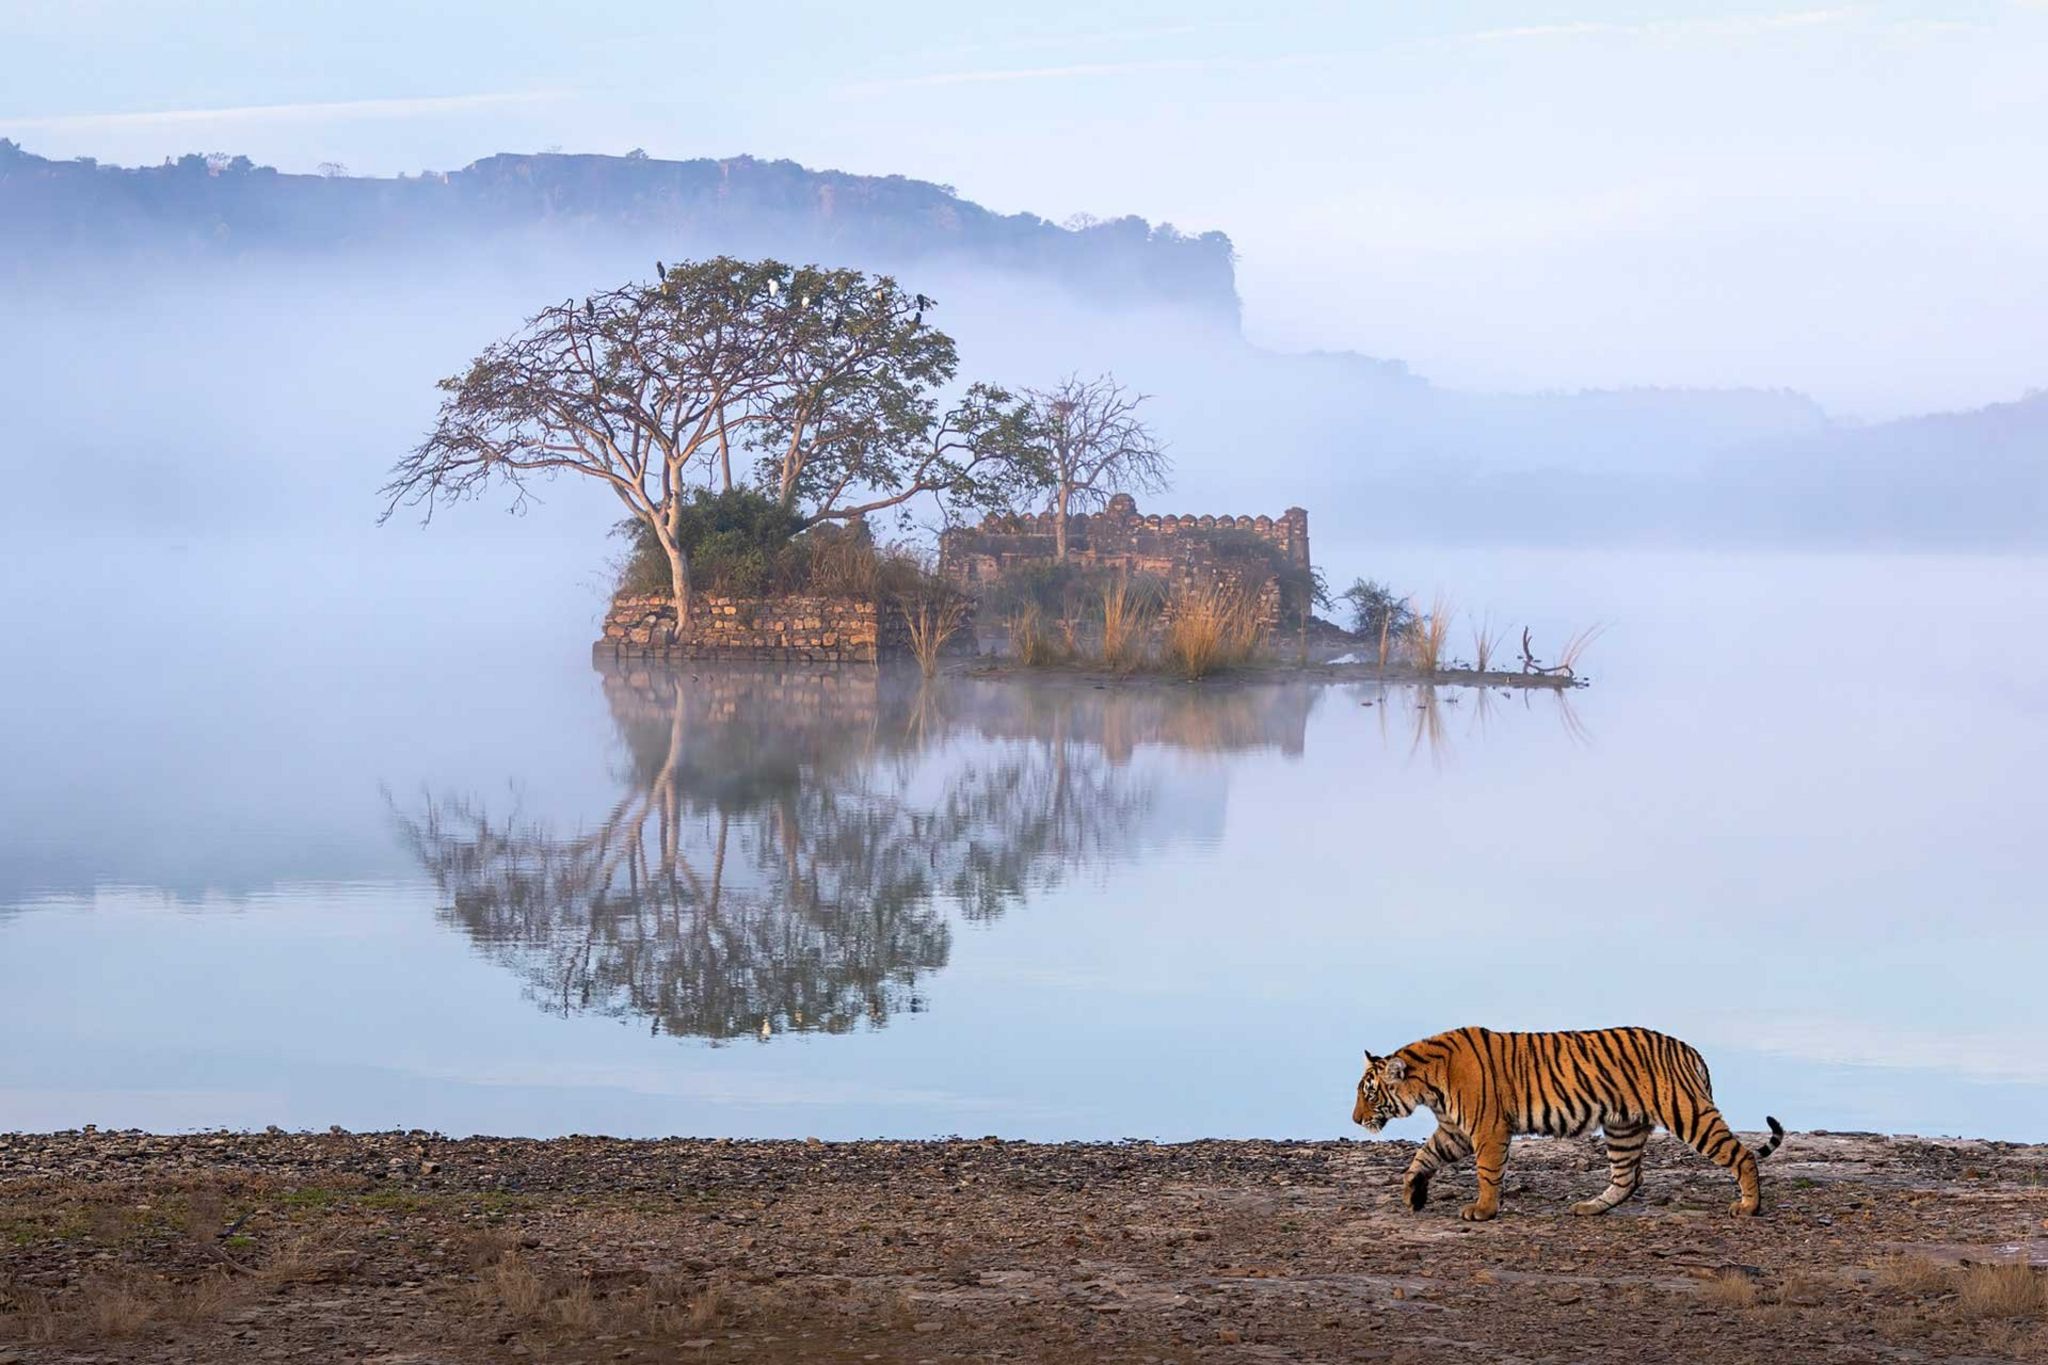 A tiger in Ranthambore National Park, Rajasthan, India.